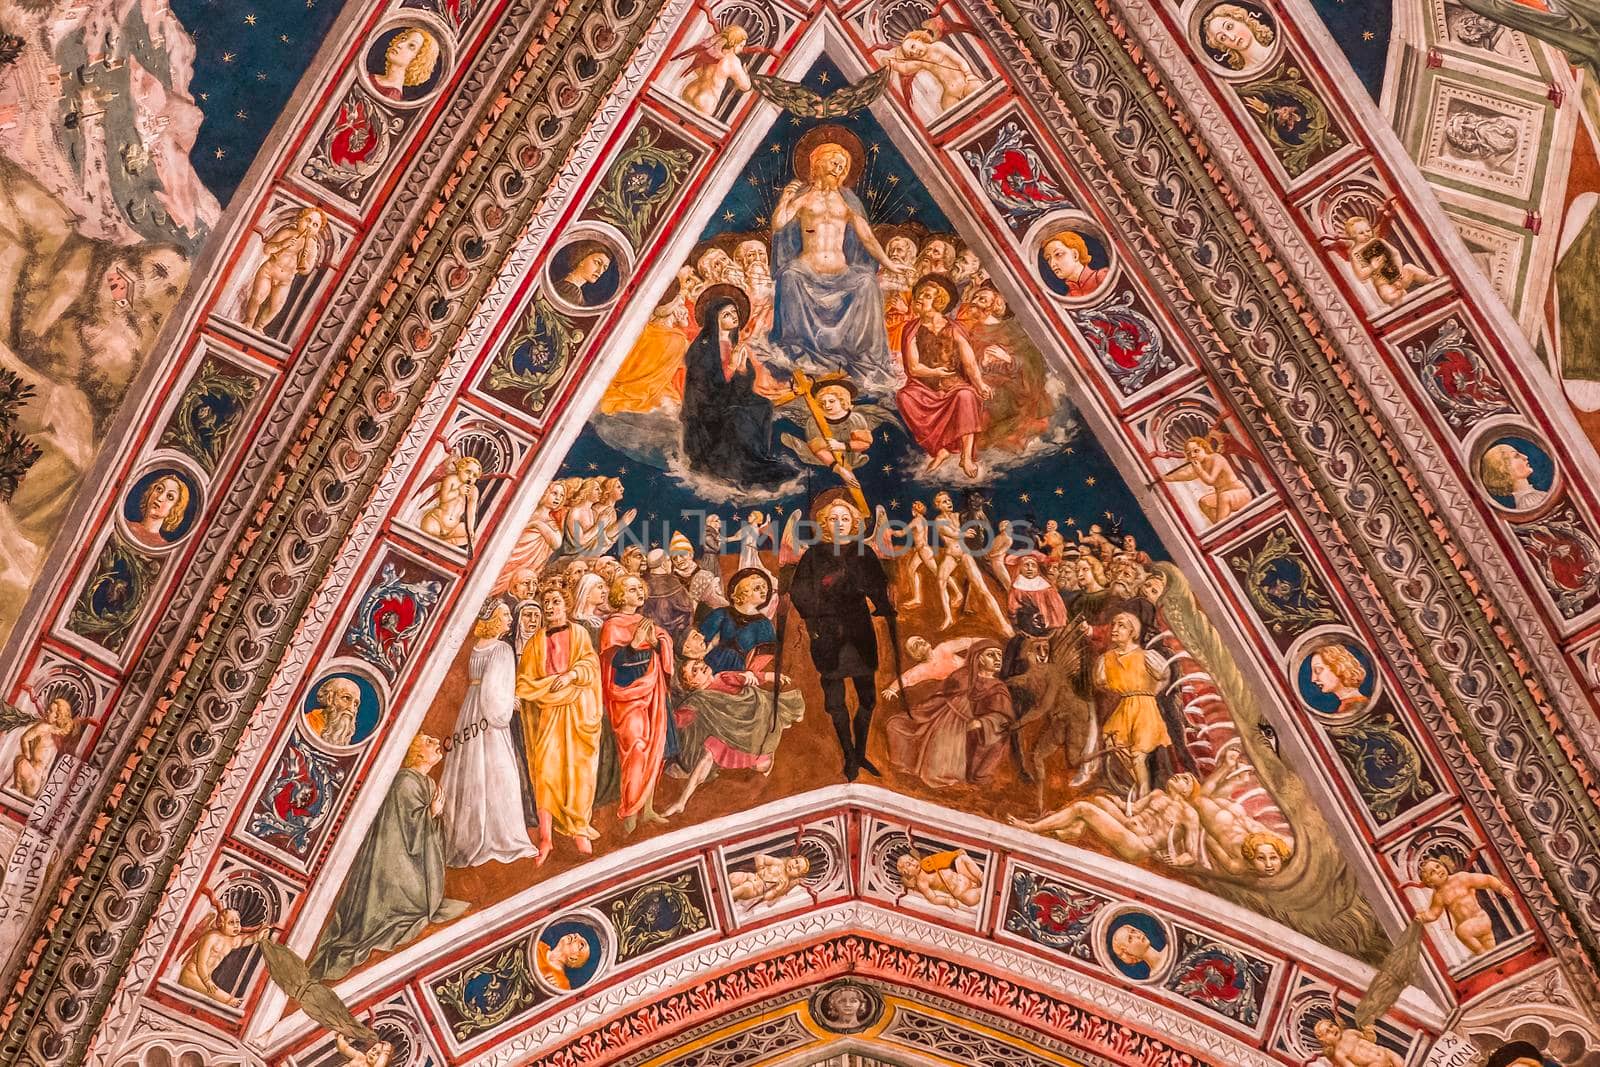 SIENA, ITALY, JUNE 12, 2016 : interiors and architectural decors of the baptistery, Siena cathedral, june 12, 2016 in Siena, Italy